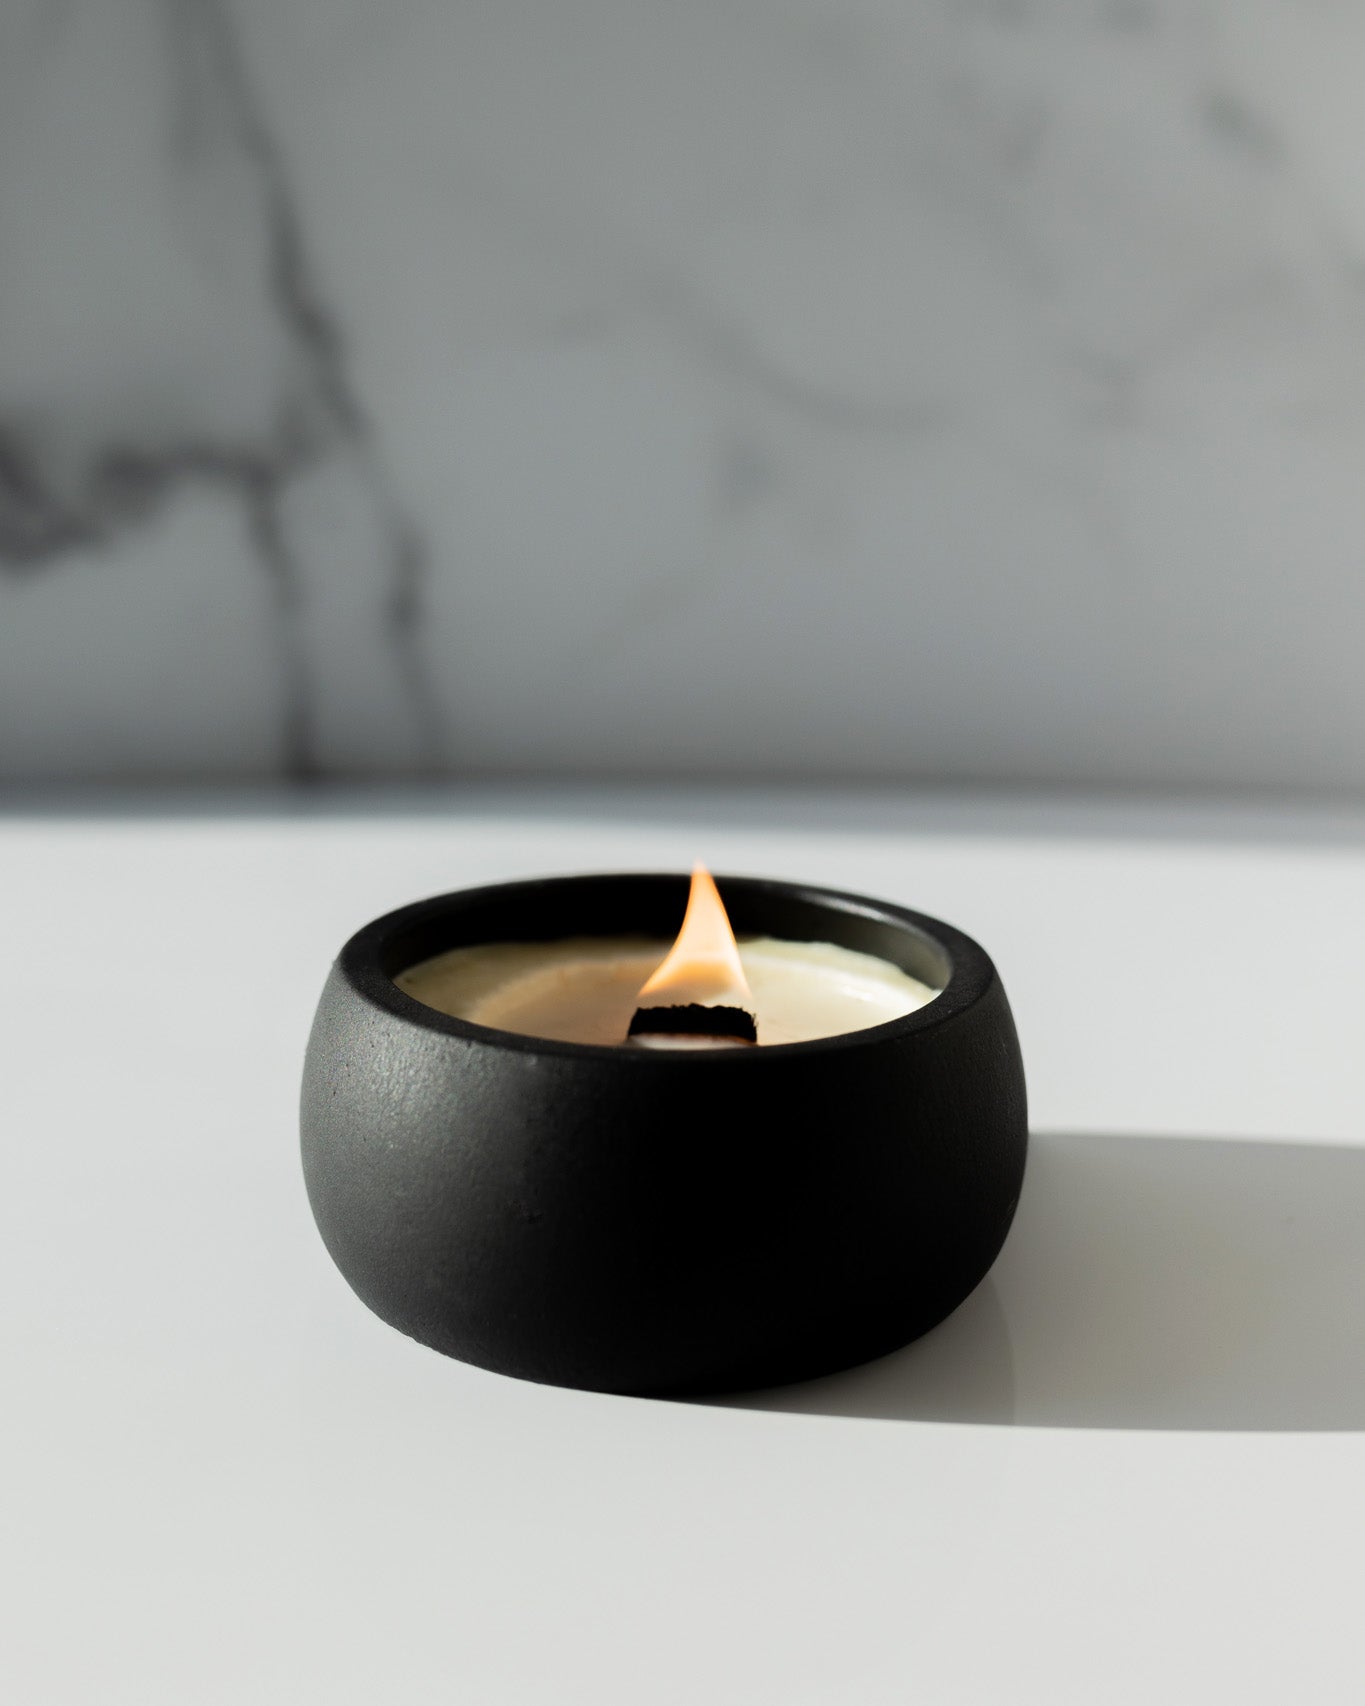 Good Vibes Coconut Soy Candle - Black Concrete Wooden Wick Vessel